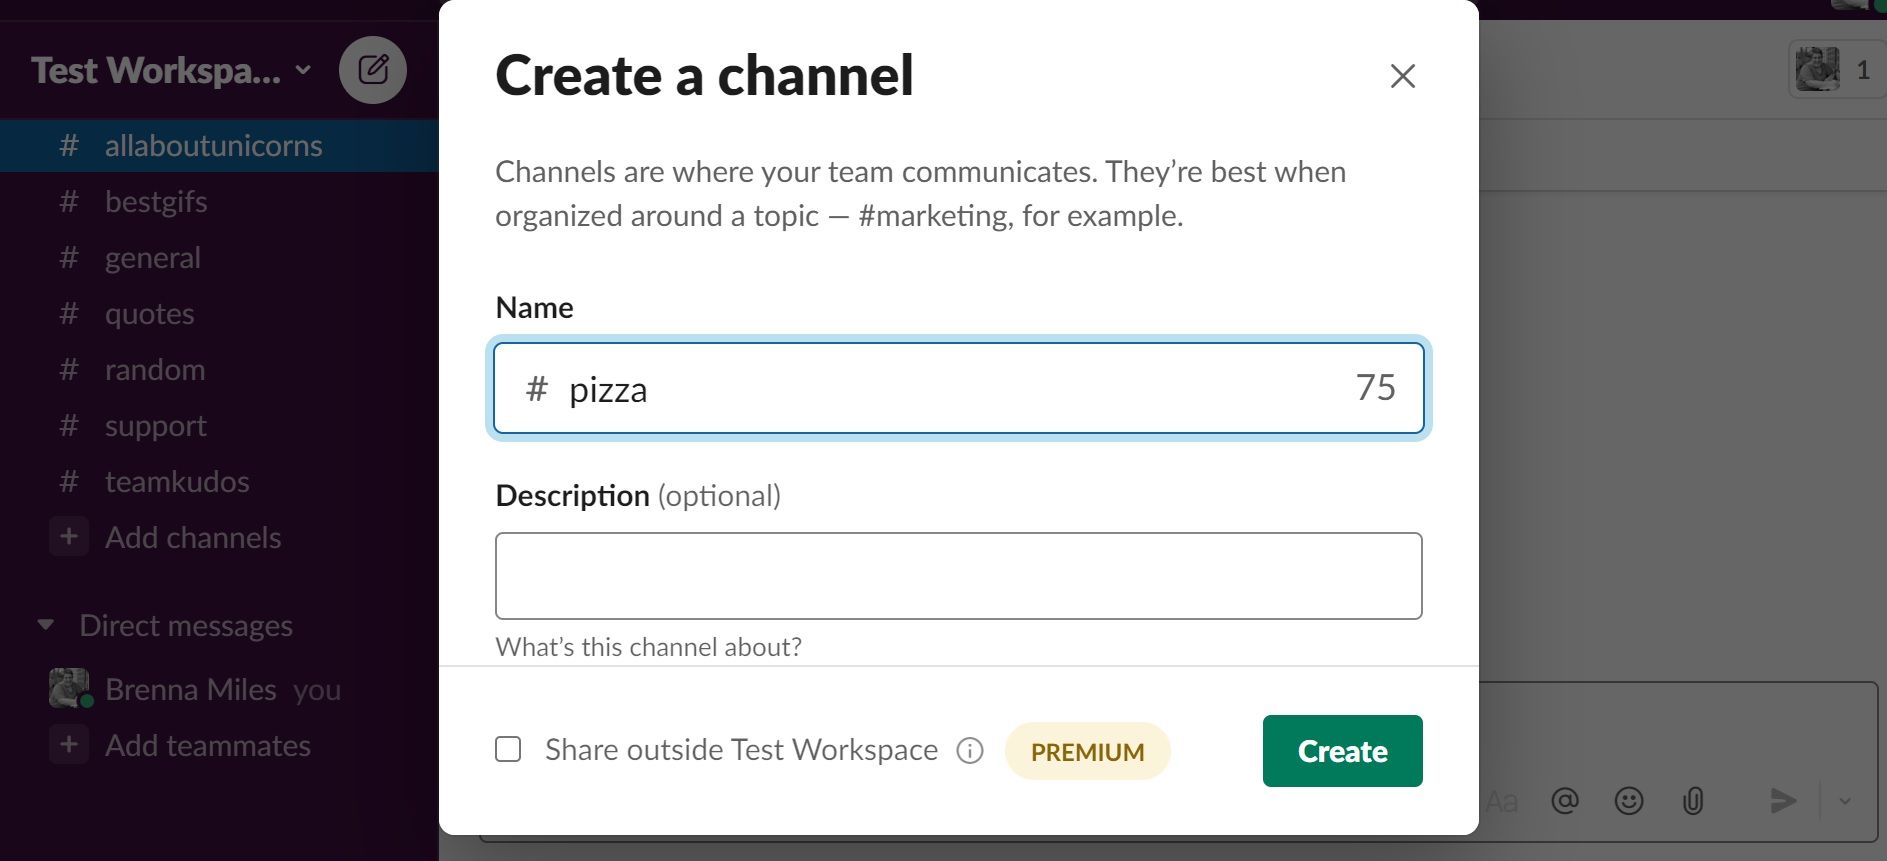 Image shows the Create a channel box in Slack